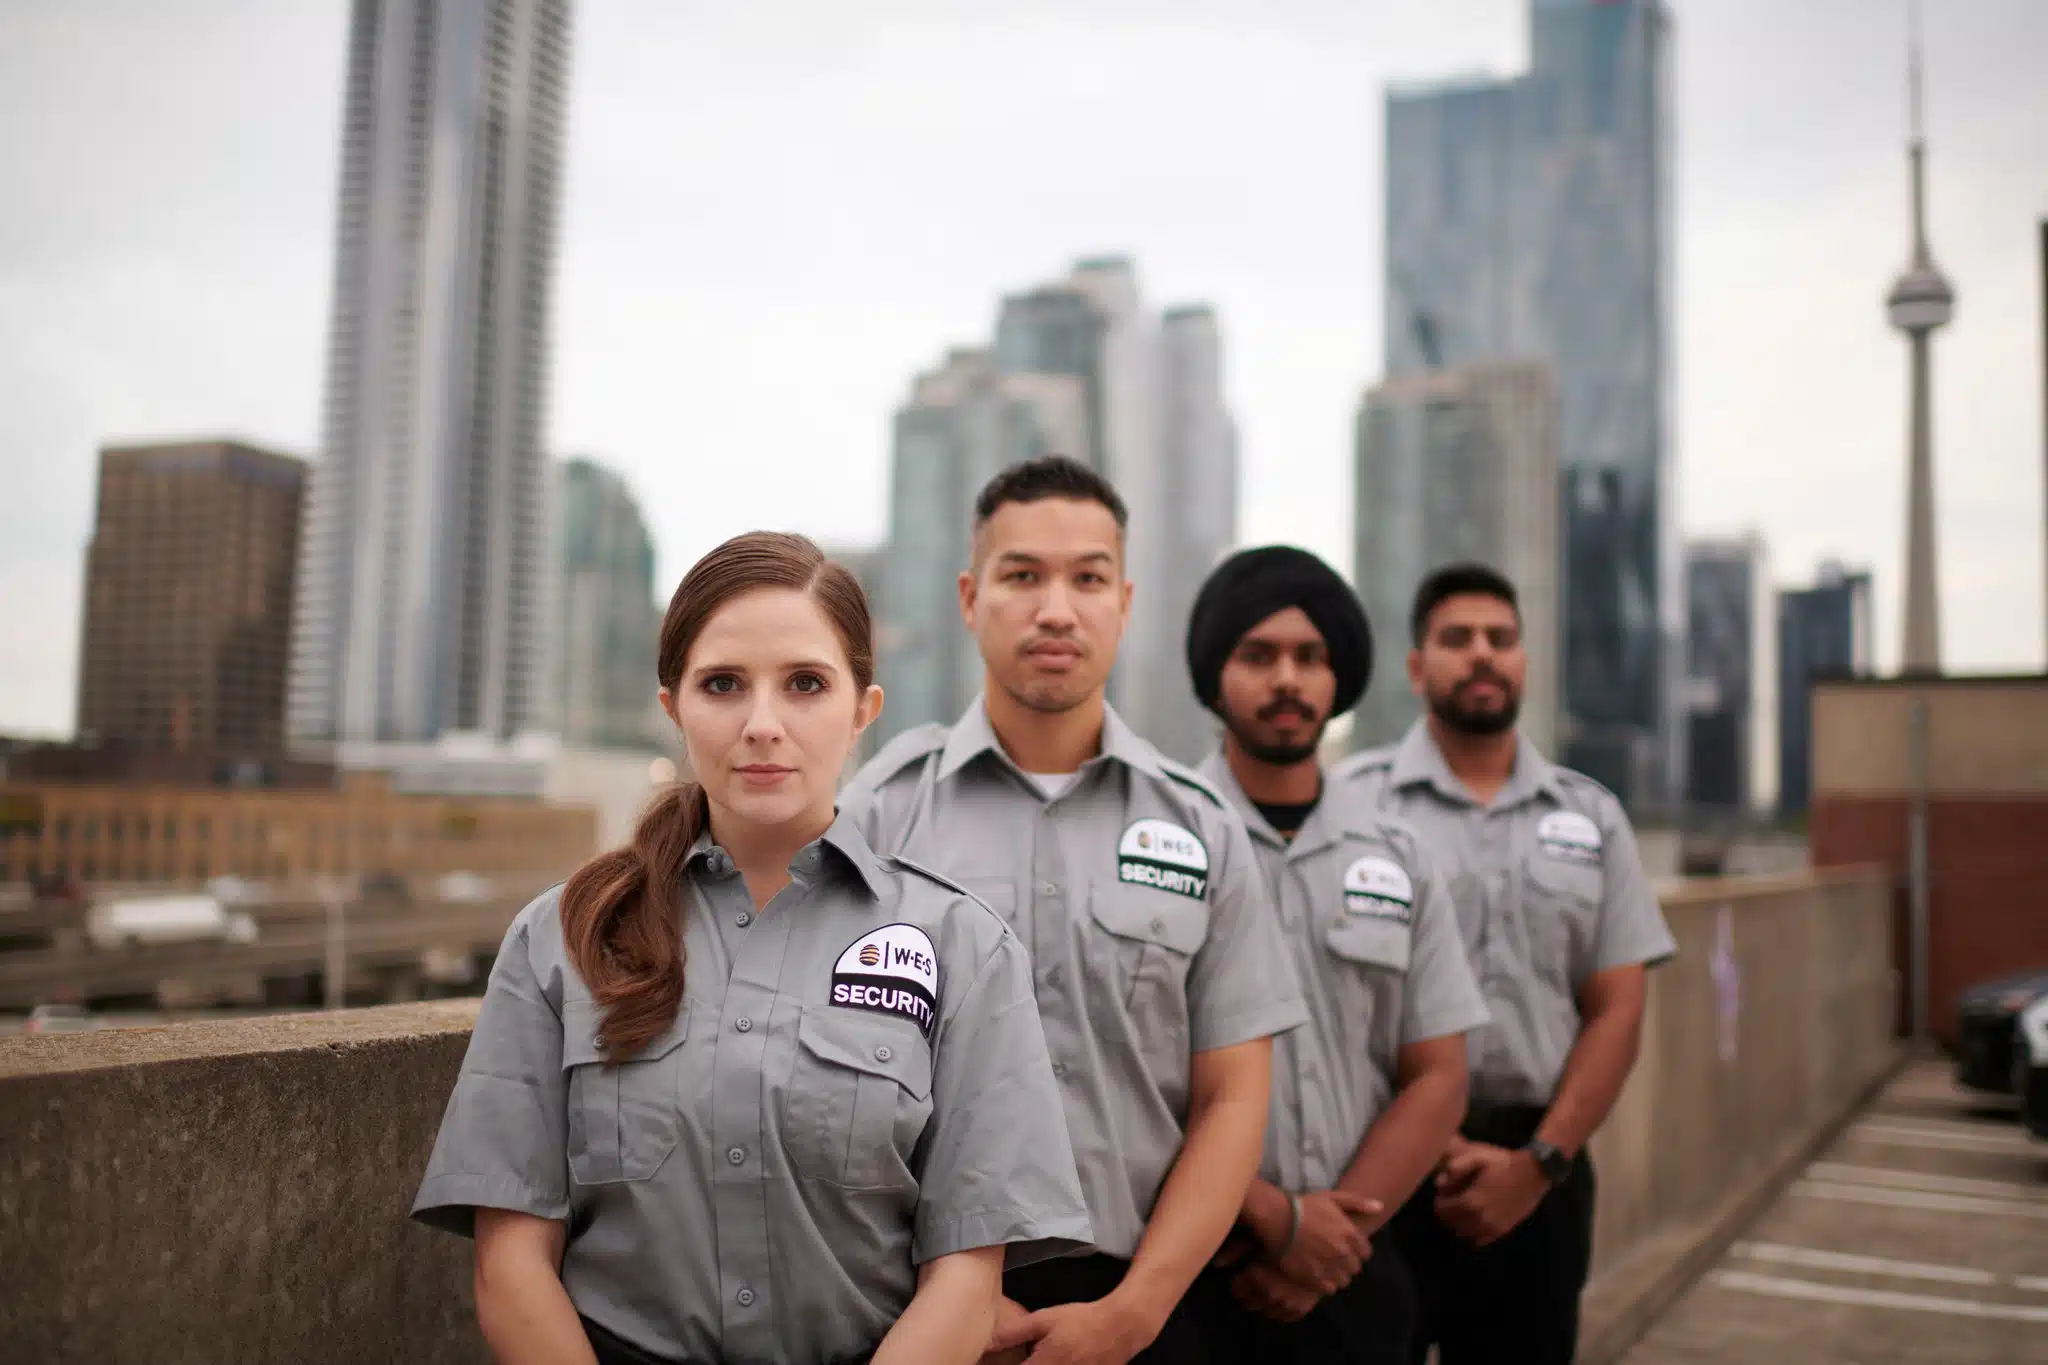 Group photo of security guards in toronto.